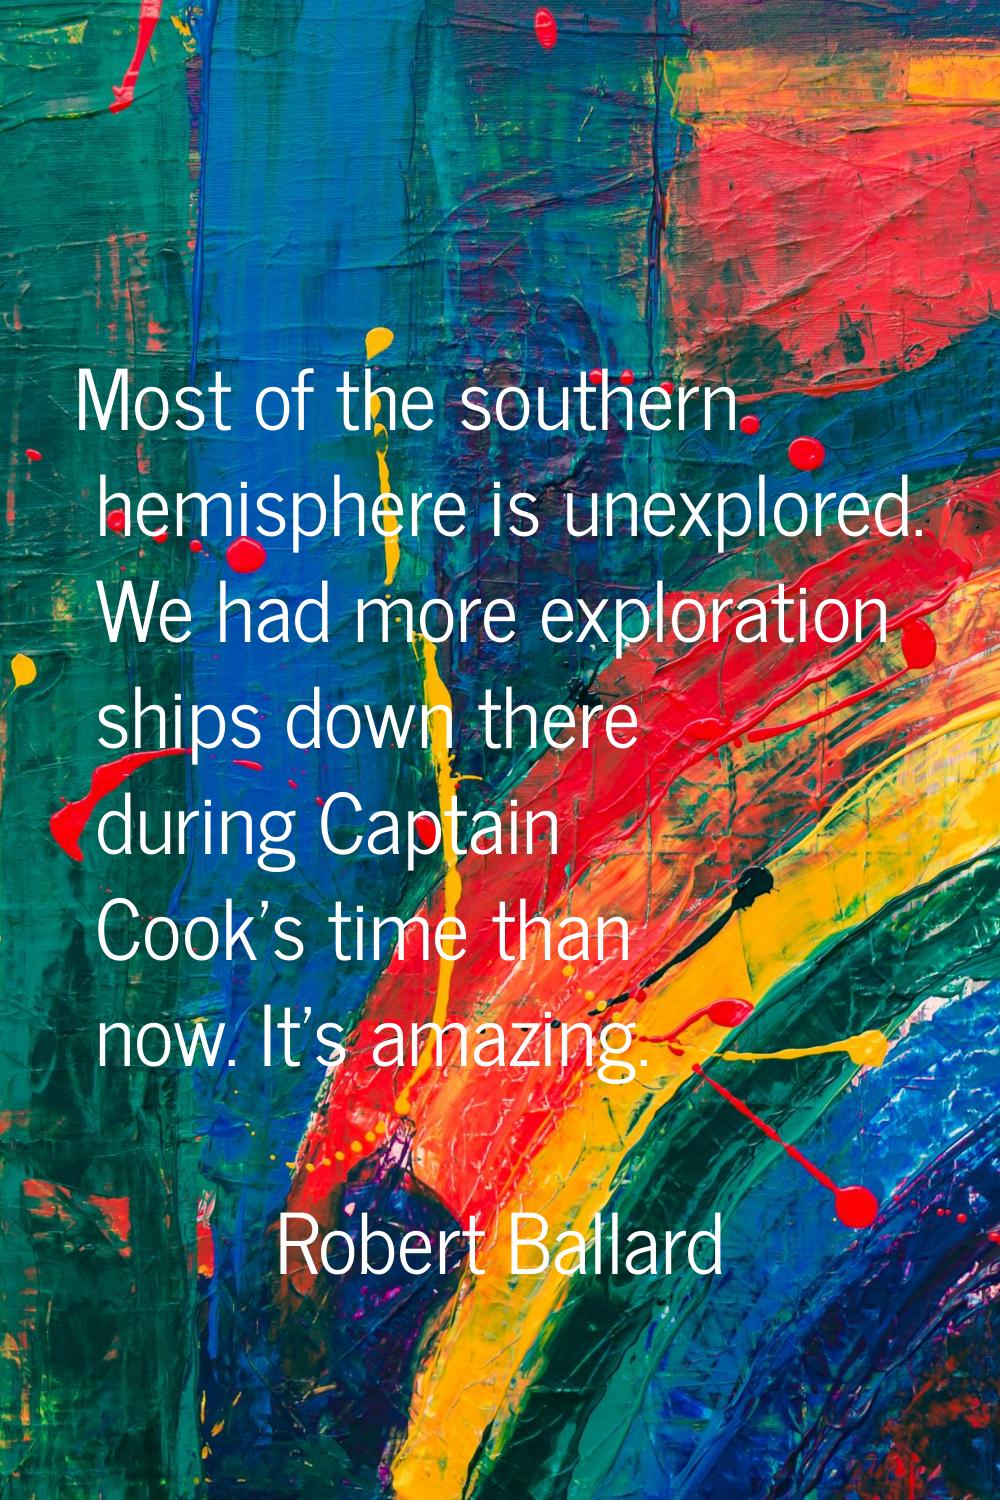 Most of the southern hemisphere is unexplored. We had more exploration ships down there during Capt